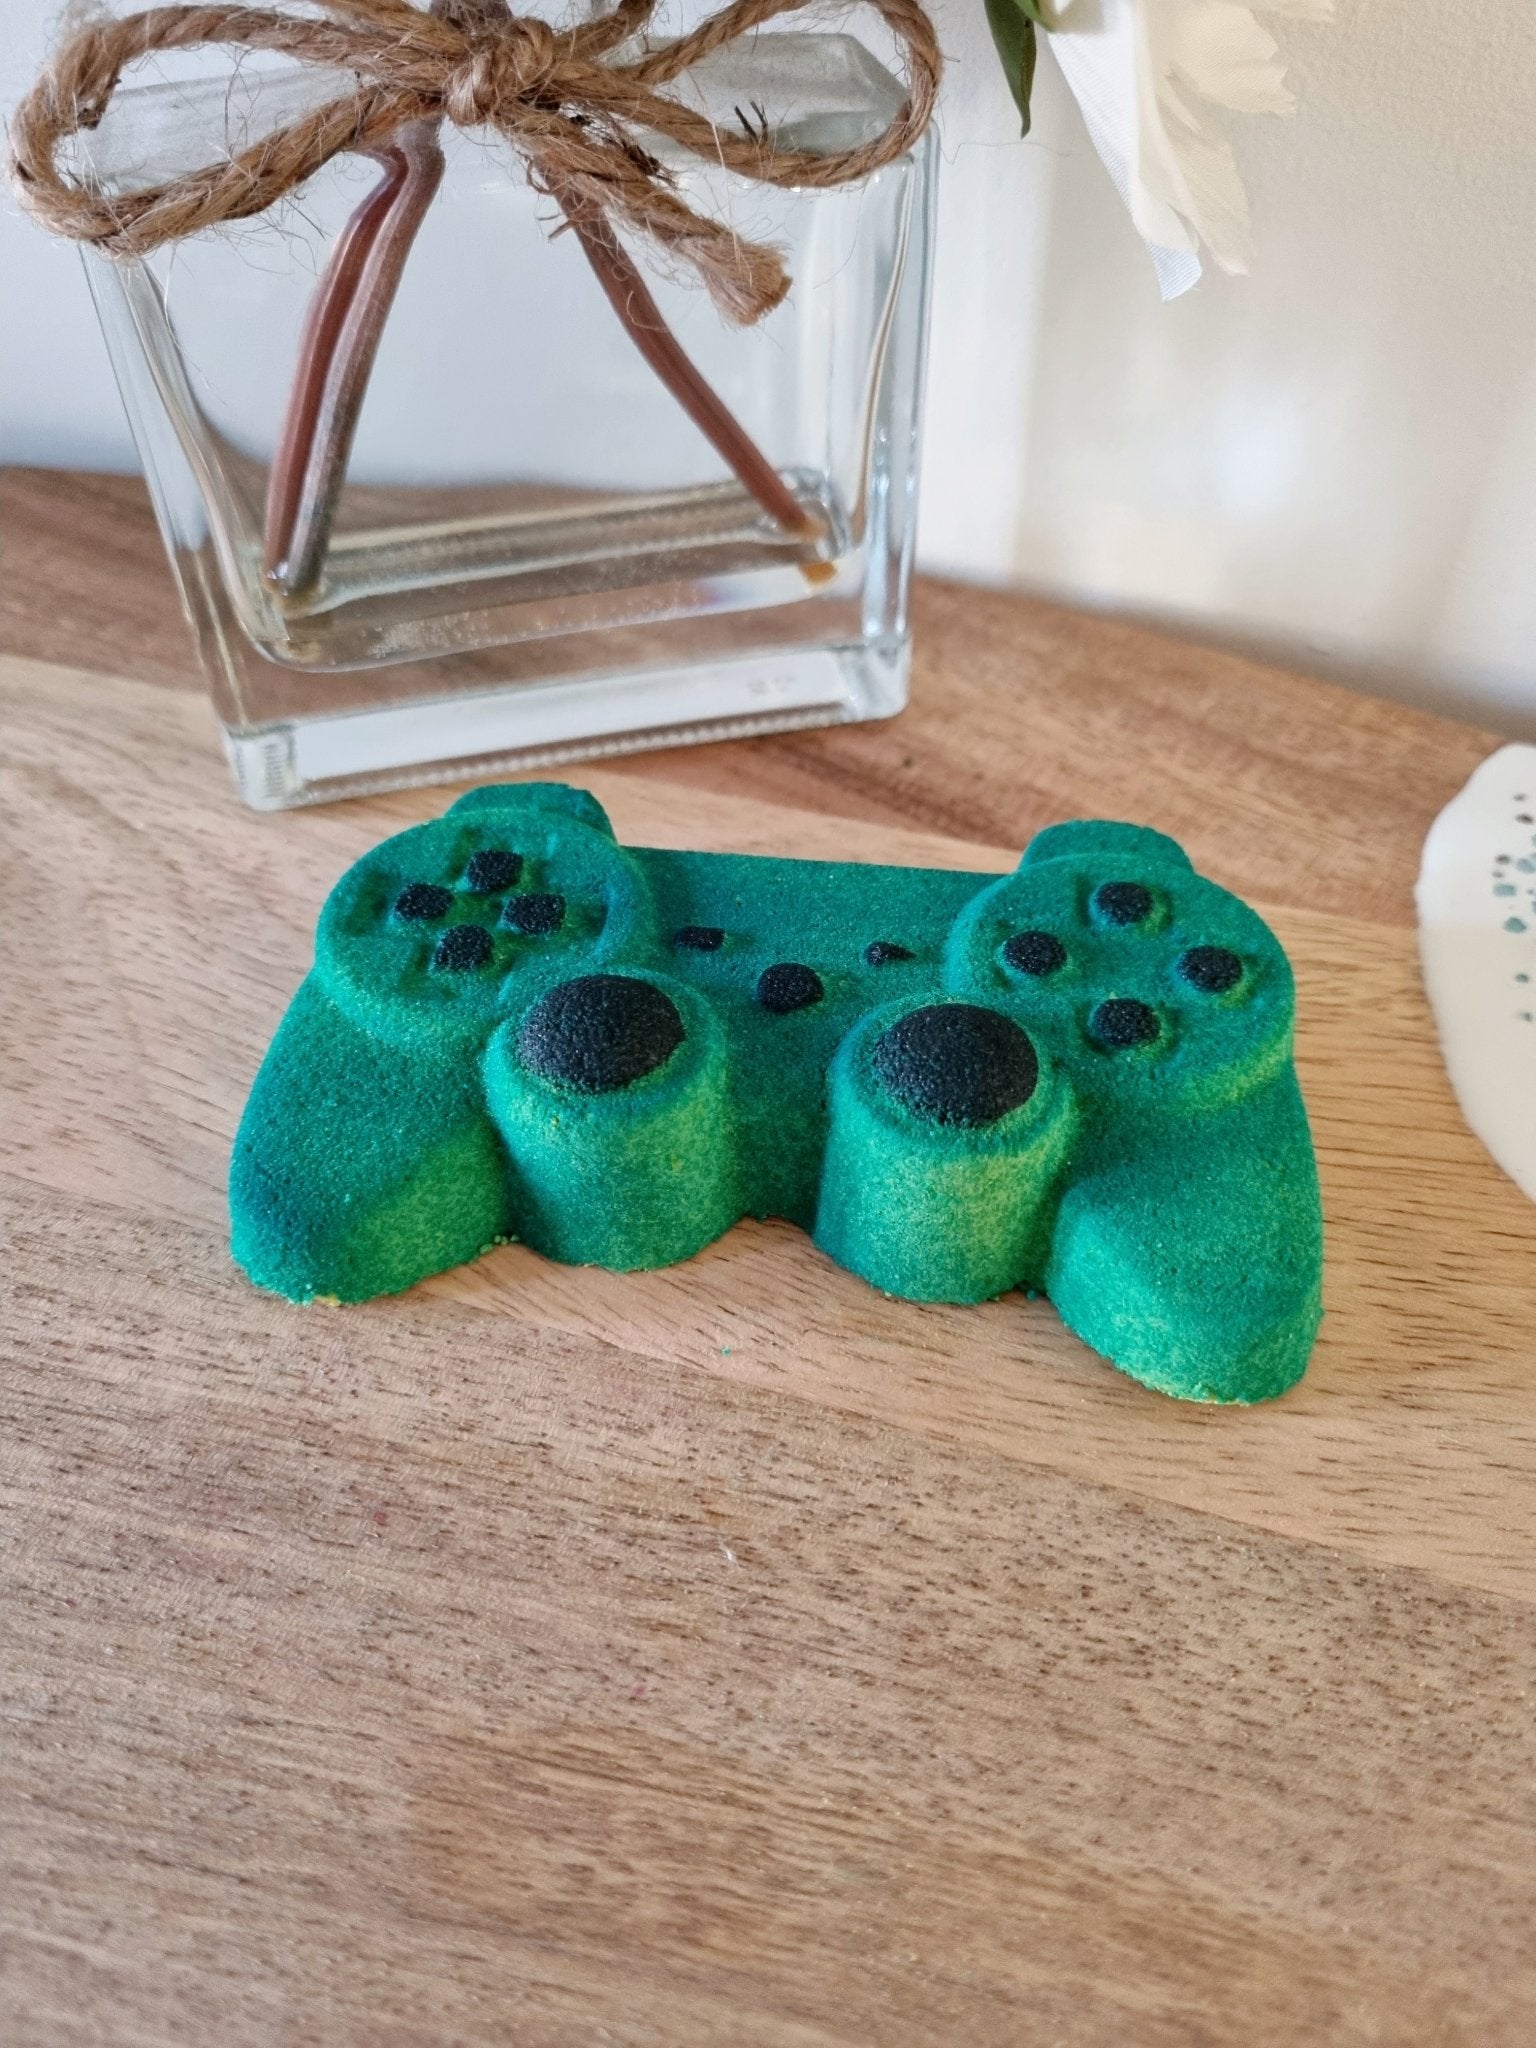 Game Controller Bath Bomb - Bath Bombs - Cottage Fresh Scents